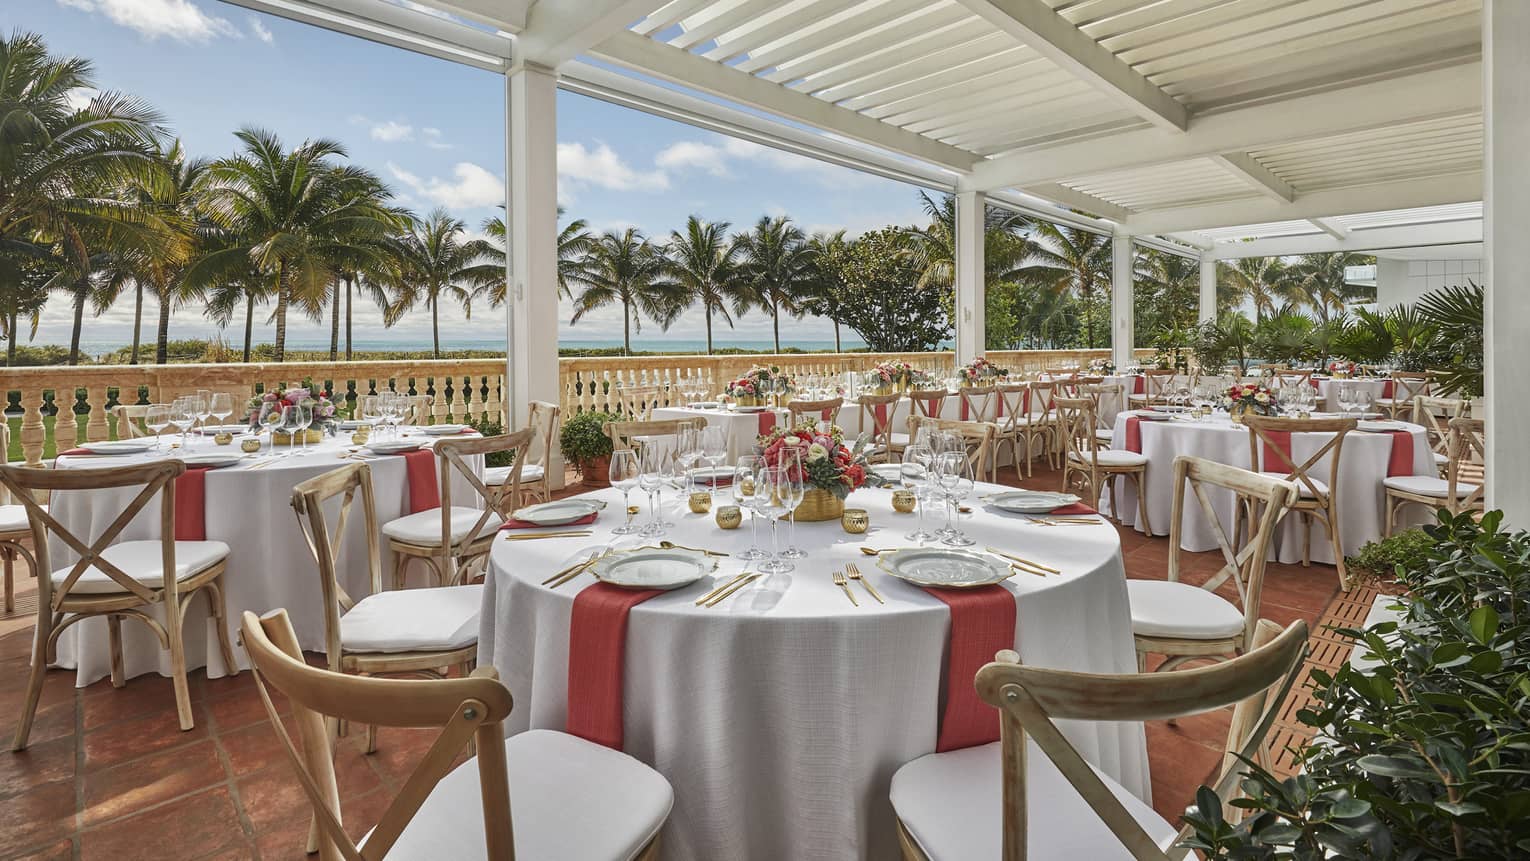 Elegantly set round dining tables and chairs on white veranda with view of palm trees and ocean